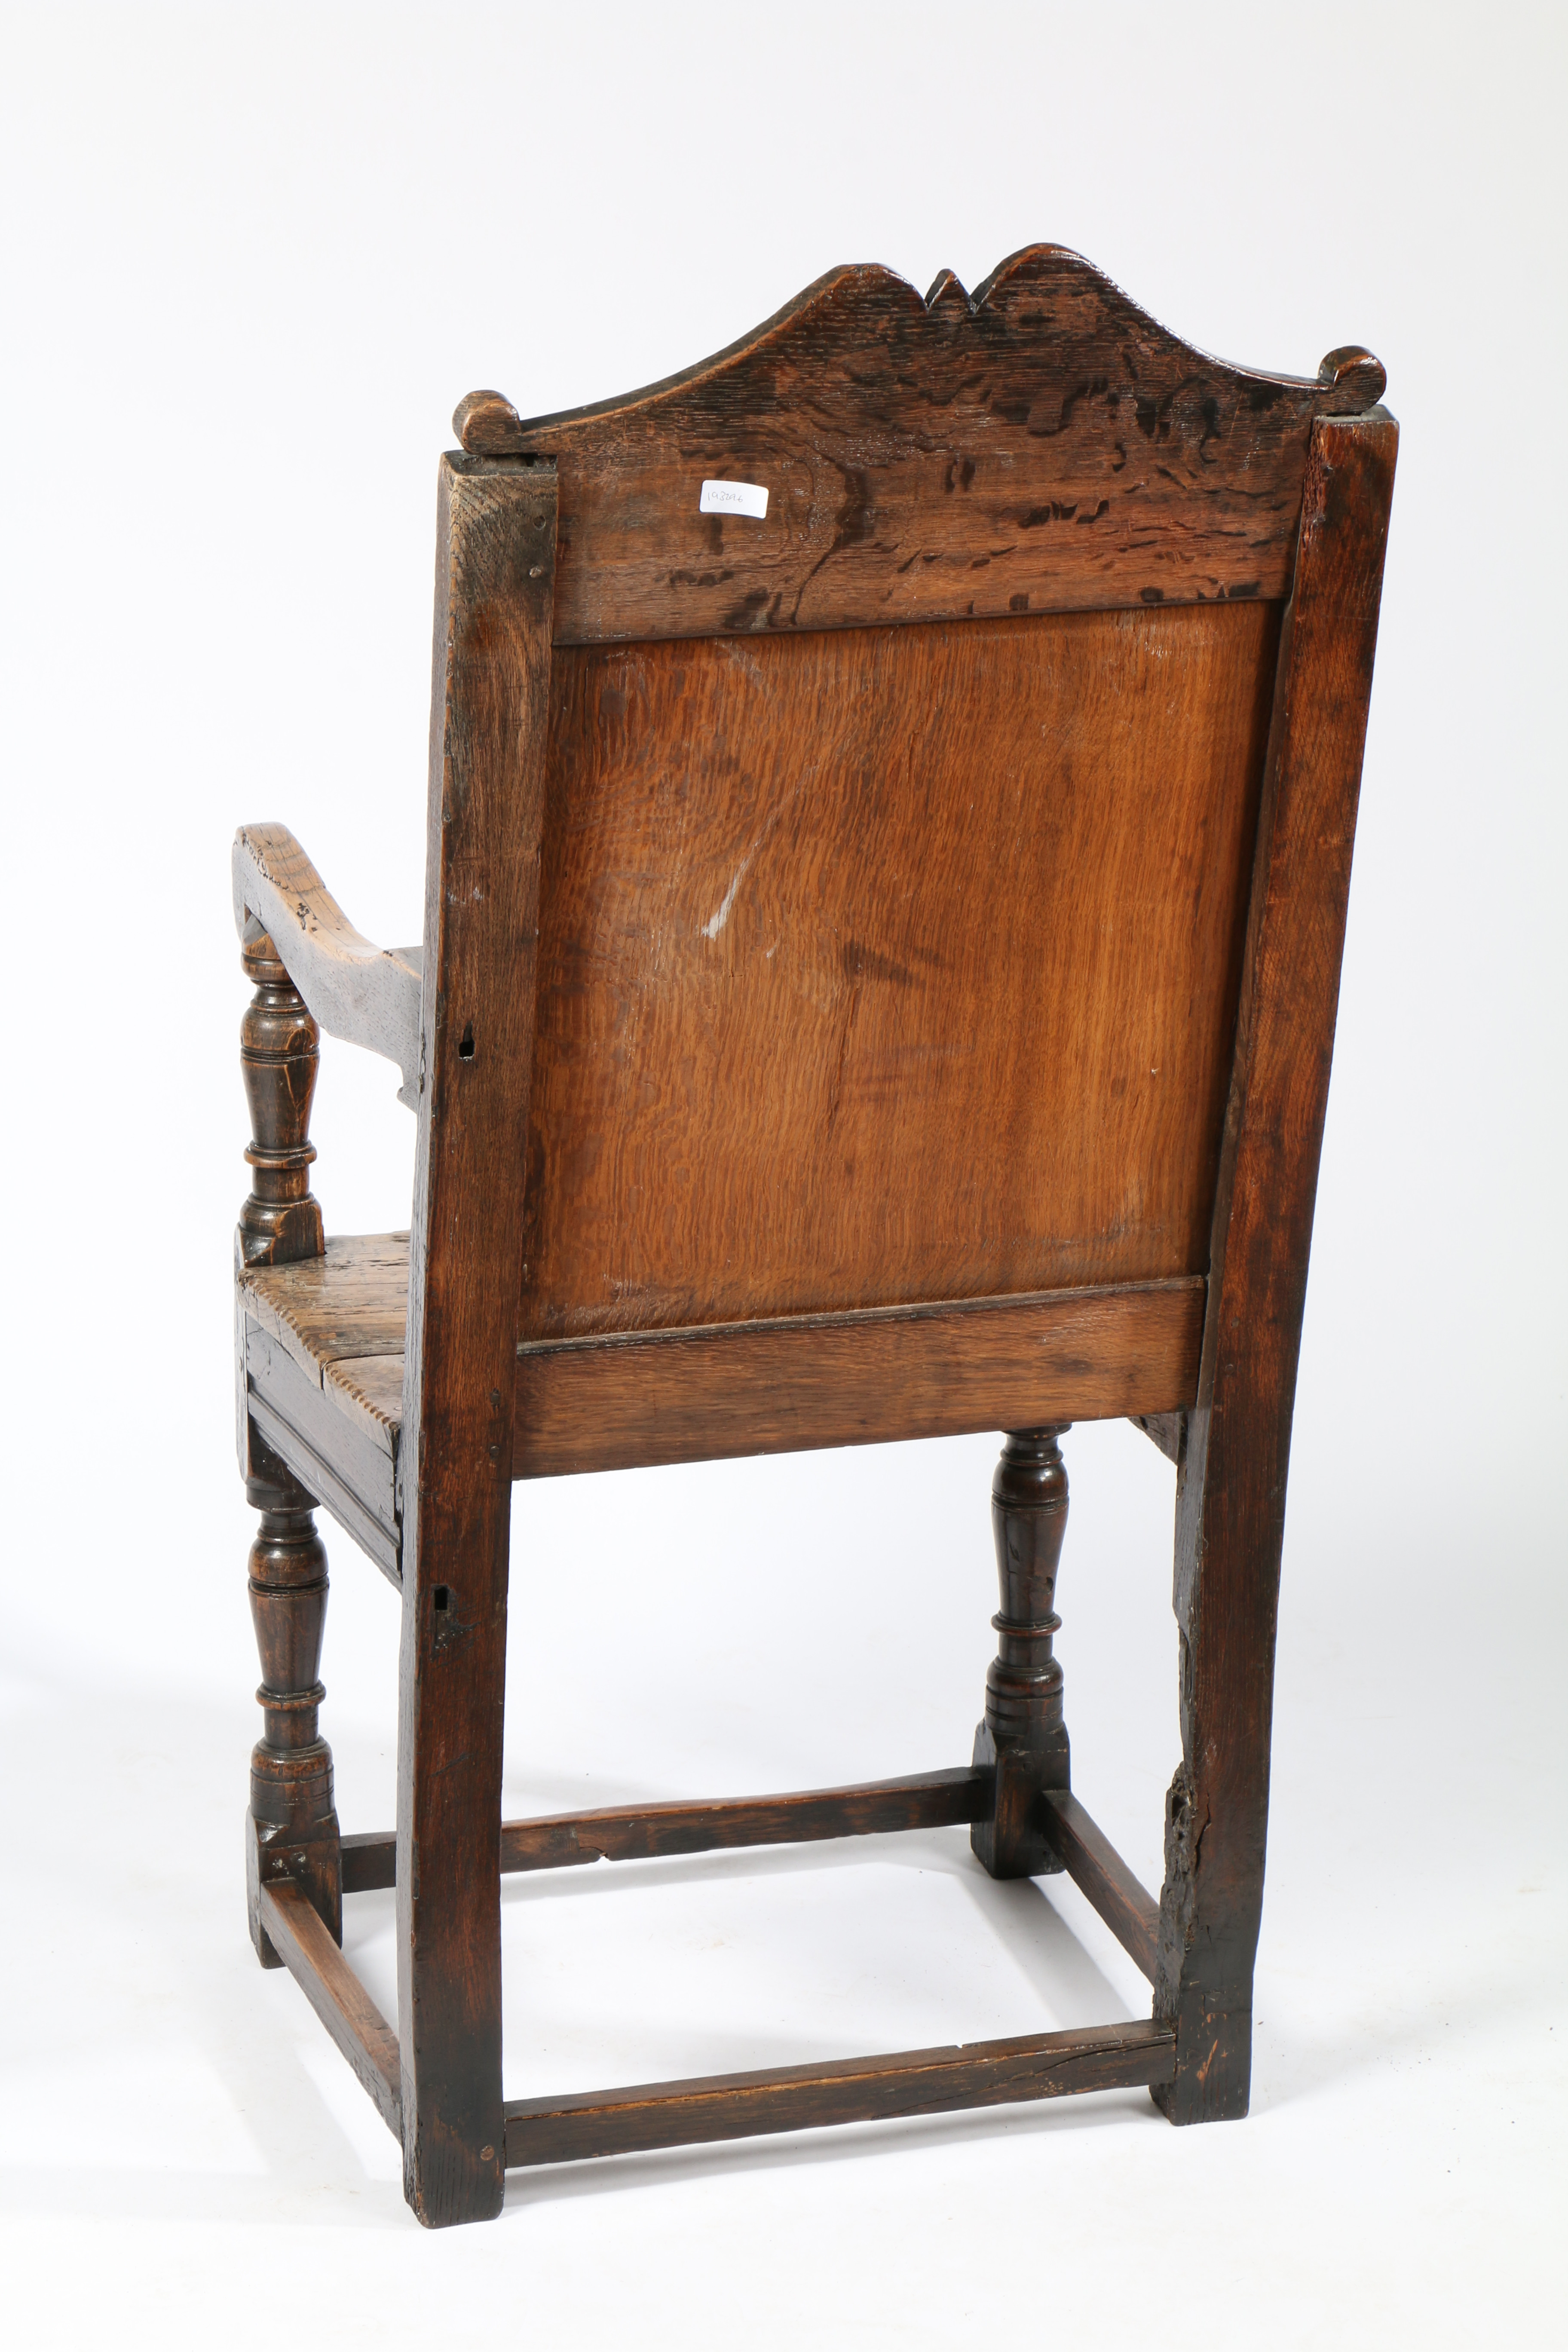 A CHARLES I OAK PANEL-BACK OPEN ARMCHAIR, CIRCA 1640. - Image 4 of 6